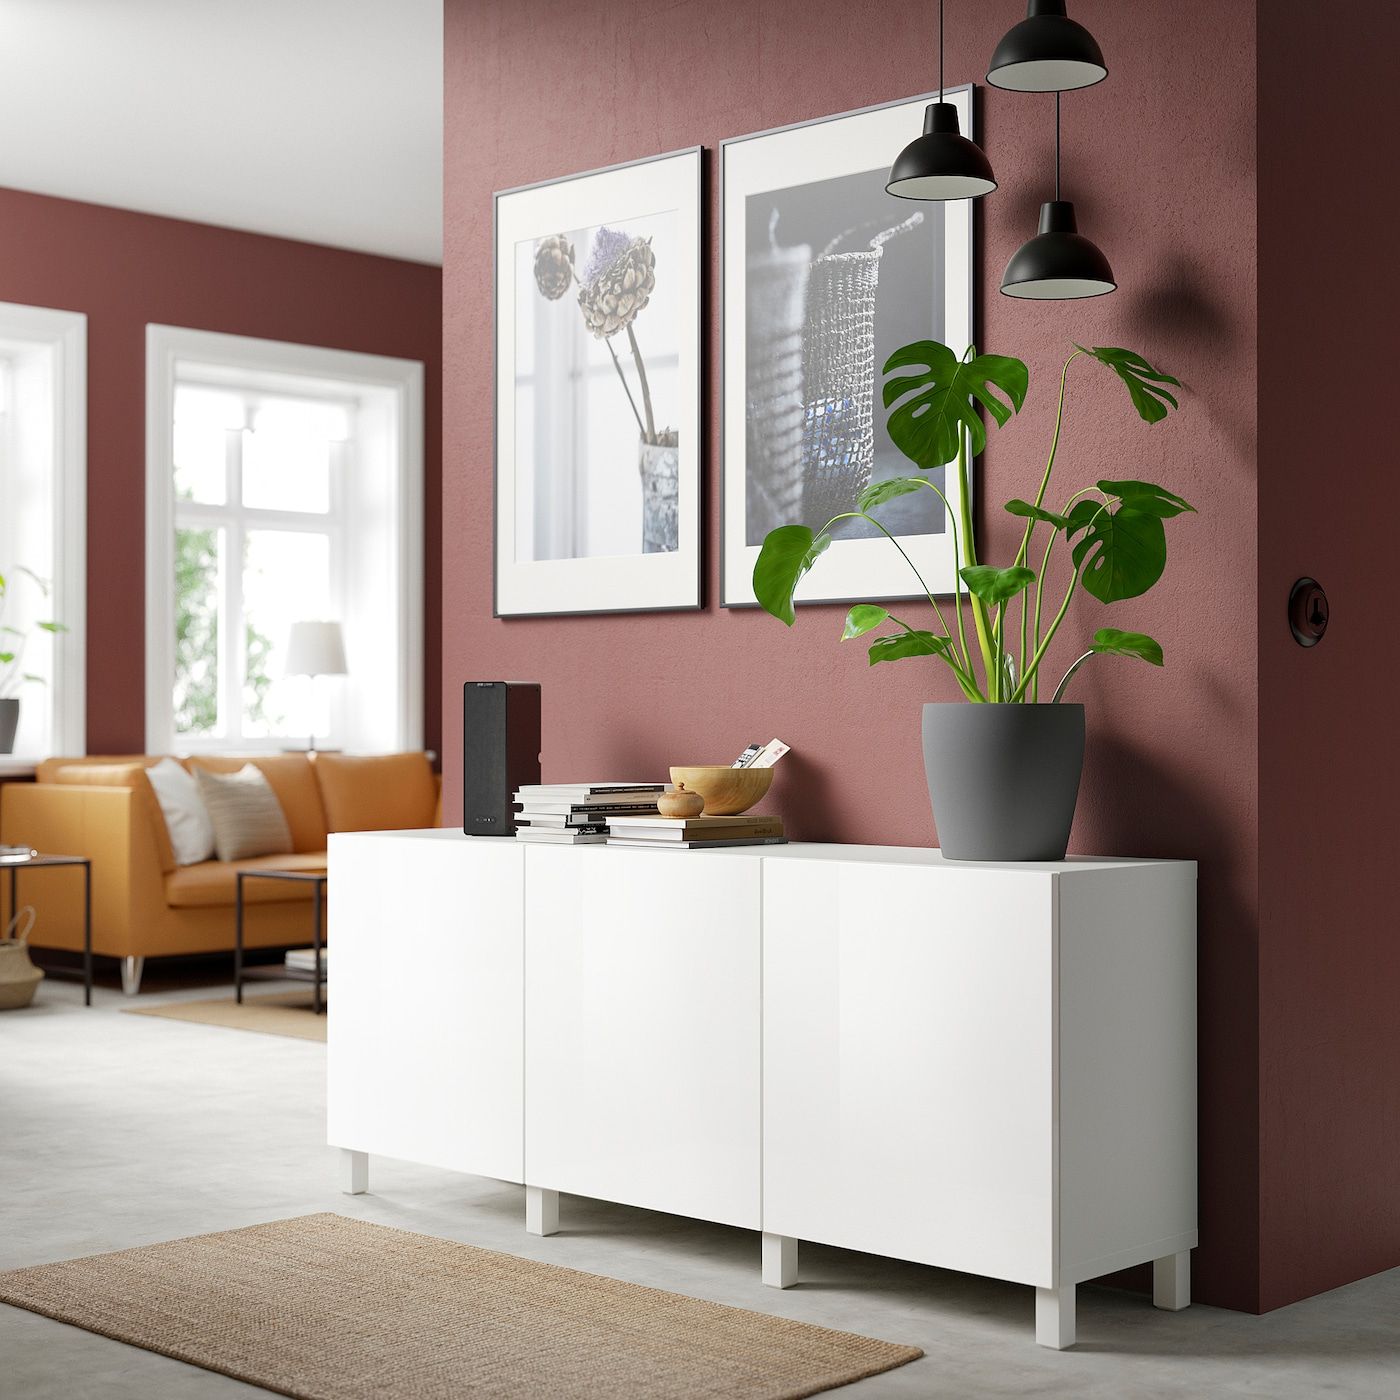 Fashionable White Sideboards For Living Room Intended For Bestå Storage Combination With Doors, White/selsviken/stubbarp High Gloss/ White, 707/8x161/2x291/8" – Ikea (View 6 of 15)